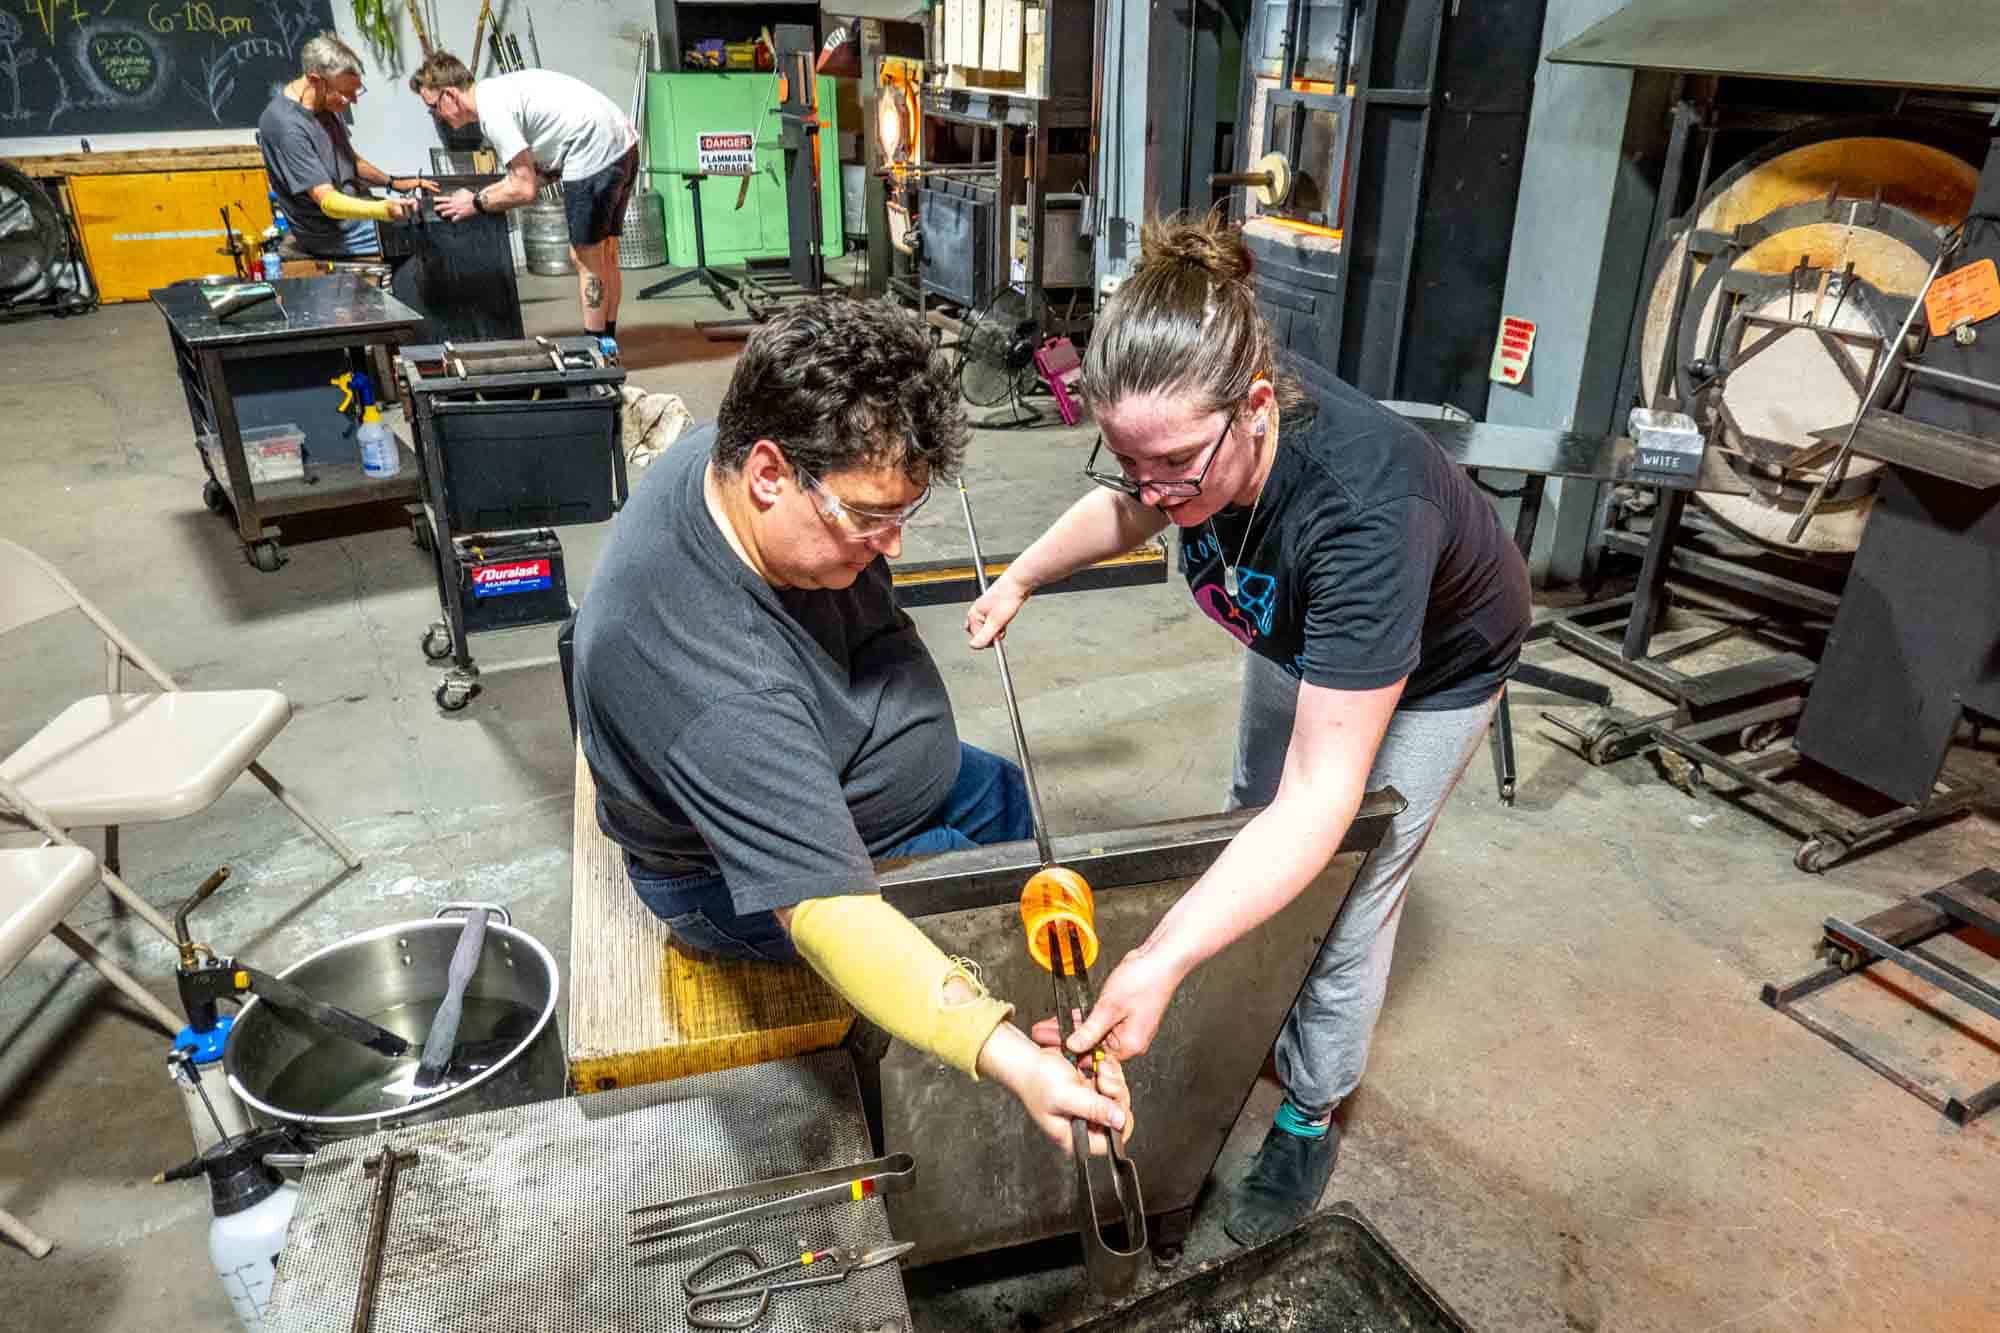 People making glass creations in a hot shop